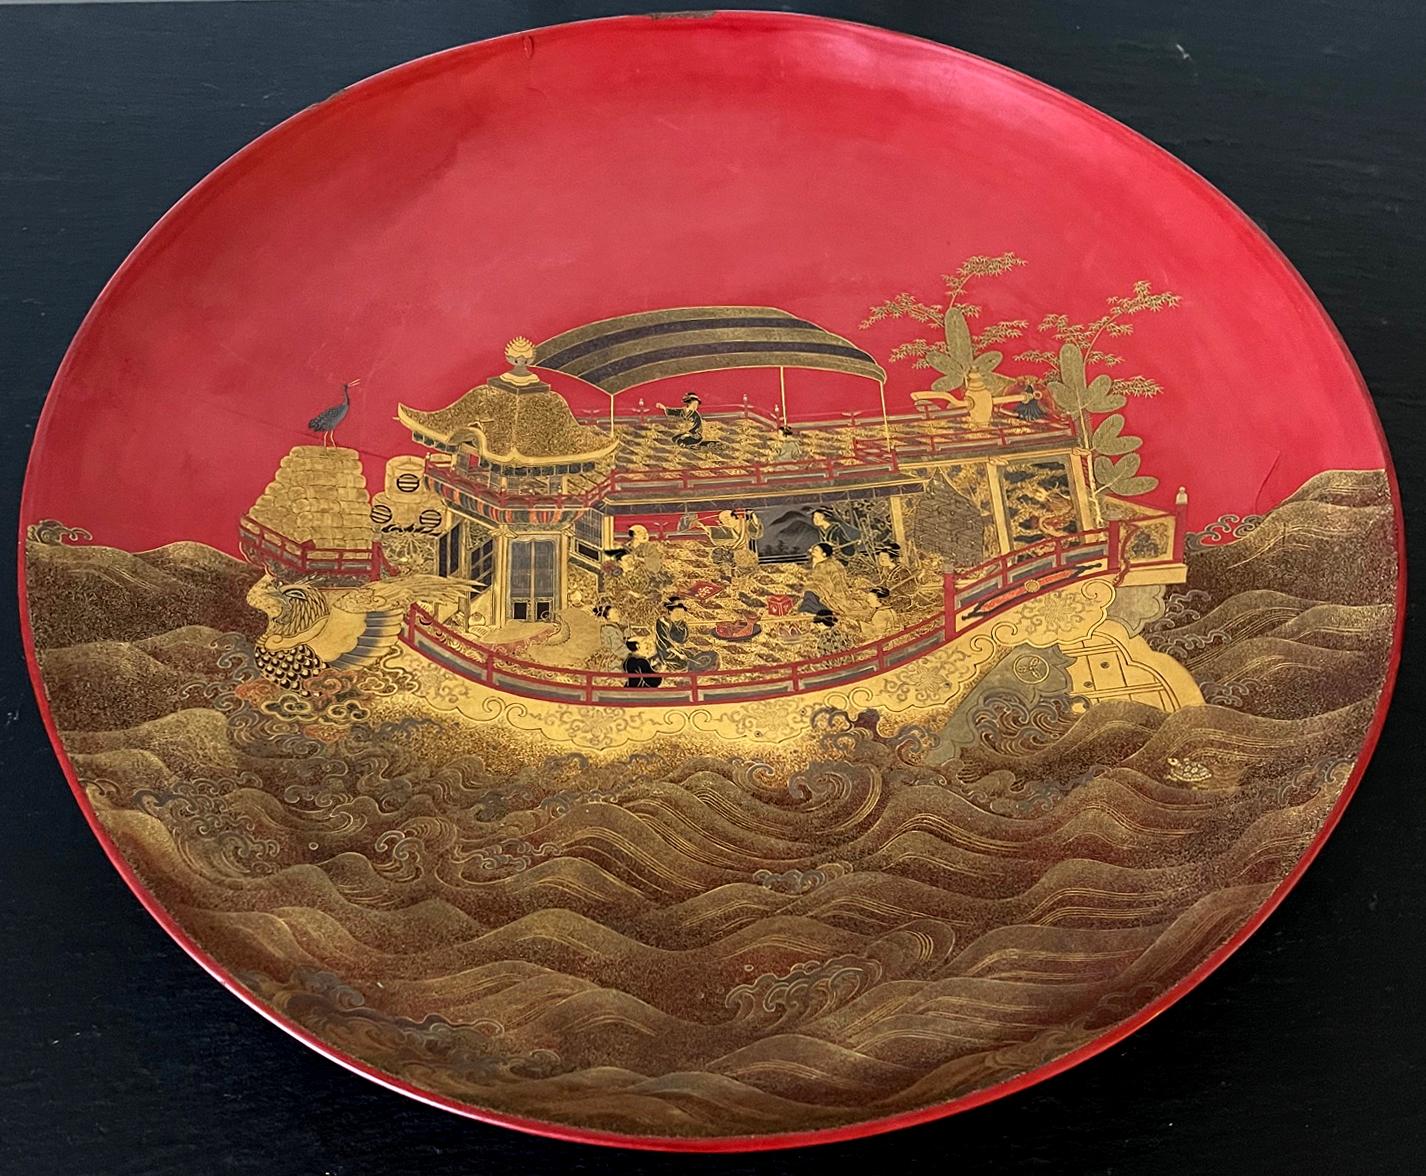 A large circular plate with a short stem base in Vermillion lacquer color. The surface was decorated with a stunning maki-e picture that depicts an elaborate boat sailing on the waves hosting a lively gathering. The boat appears to be a party vessel